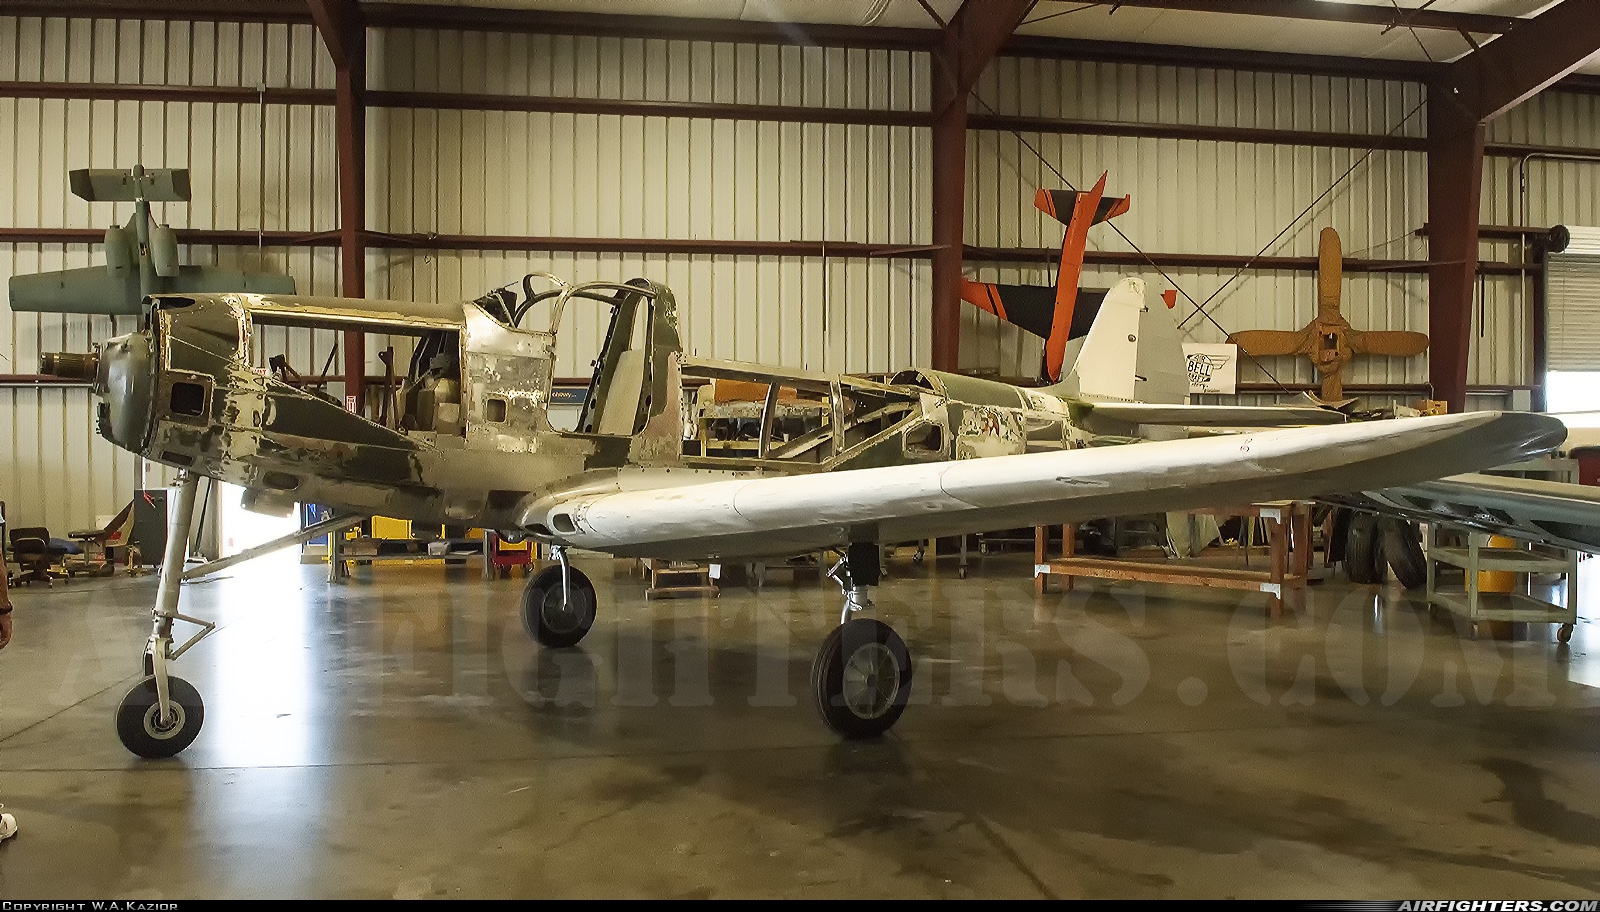 Private - Planes of Fame Air Museum Bell P-39N Airacobra 42-19027 at Chino (CNO), USA